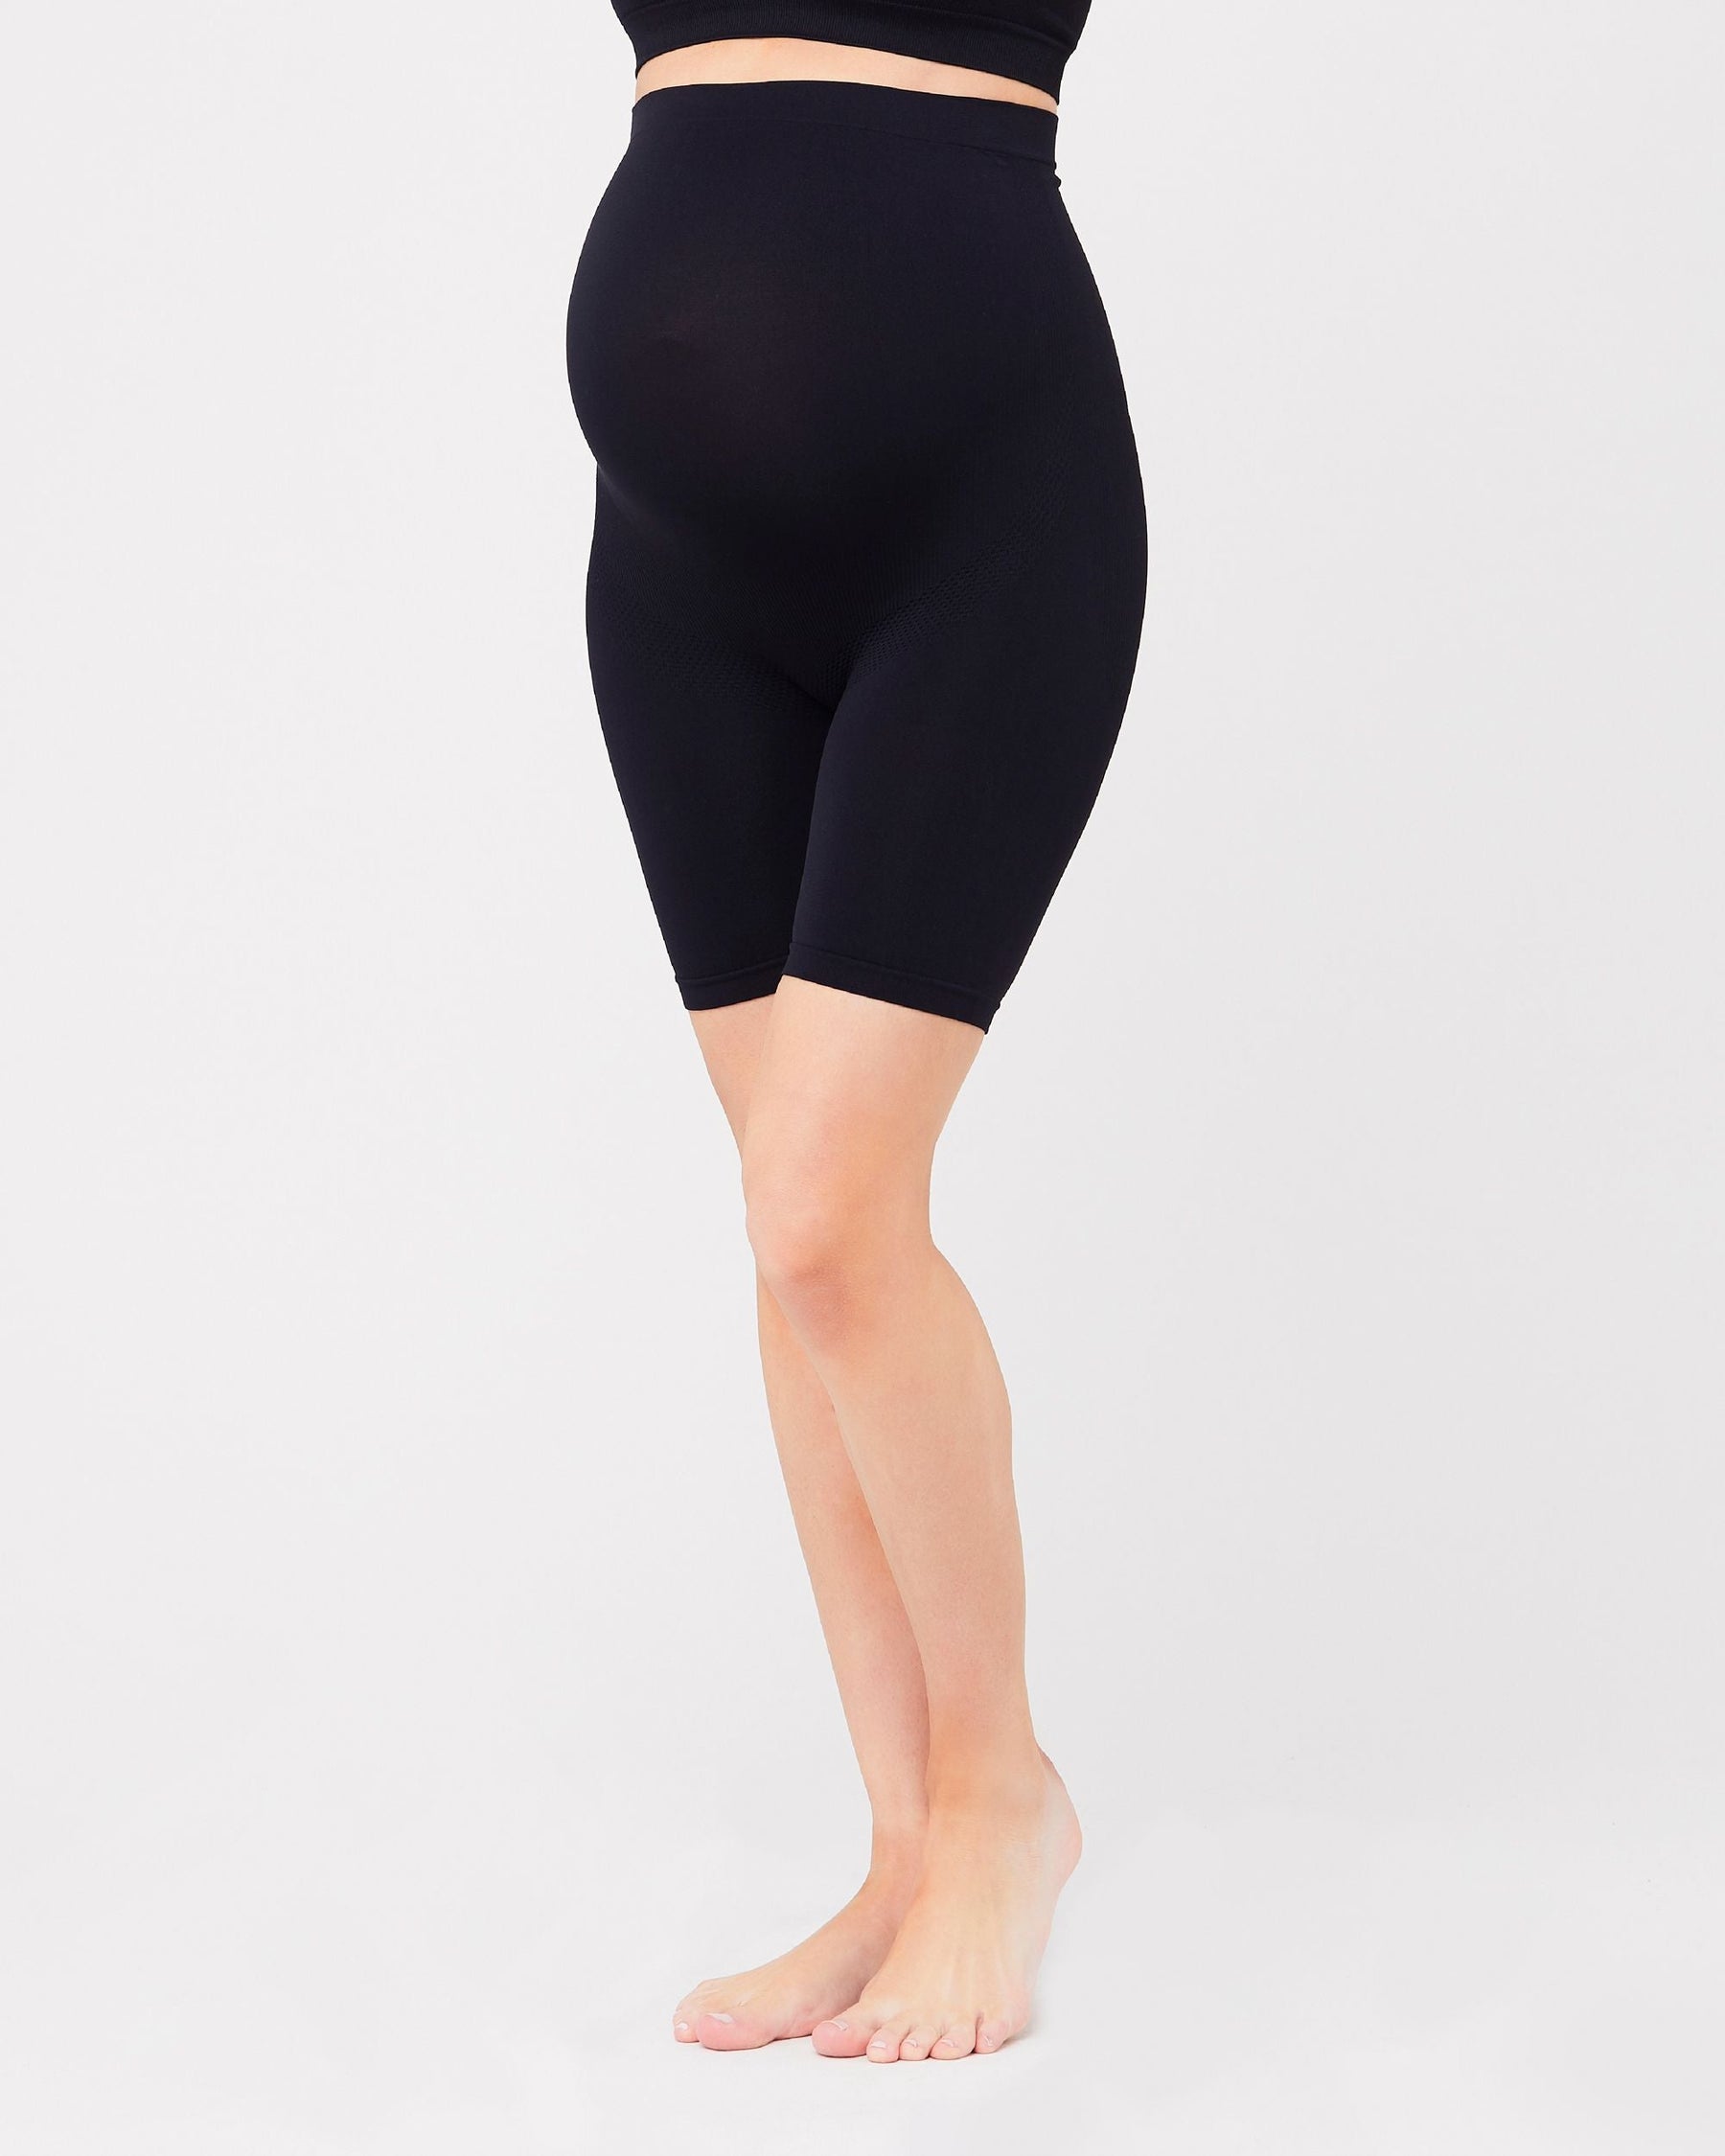 Seamless Support Shorts - Black